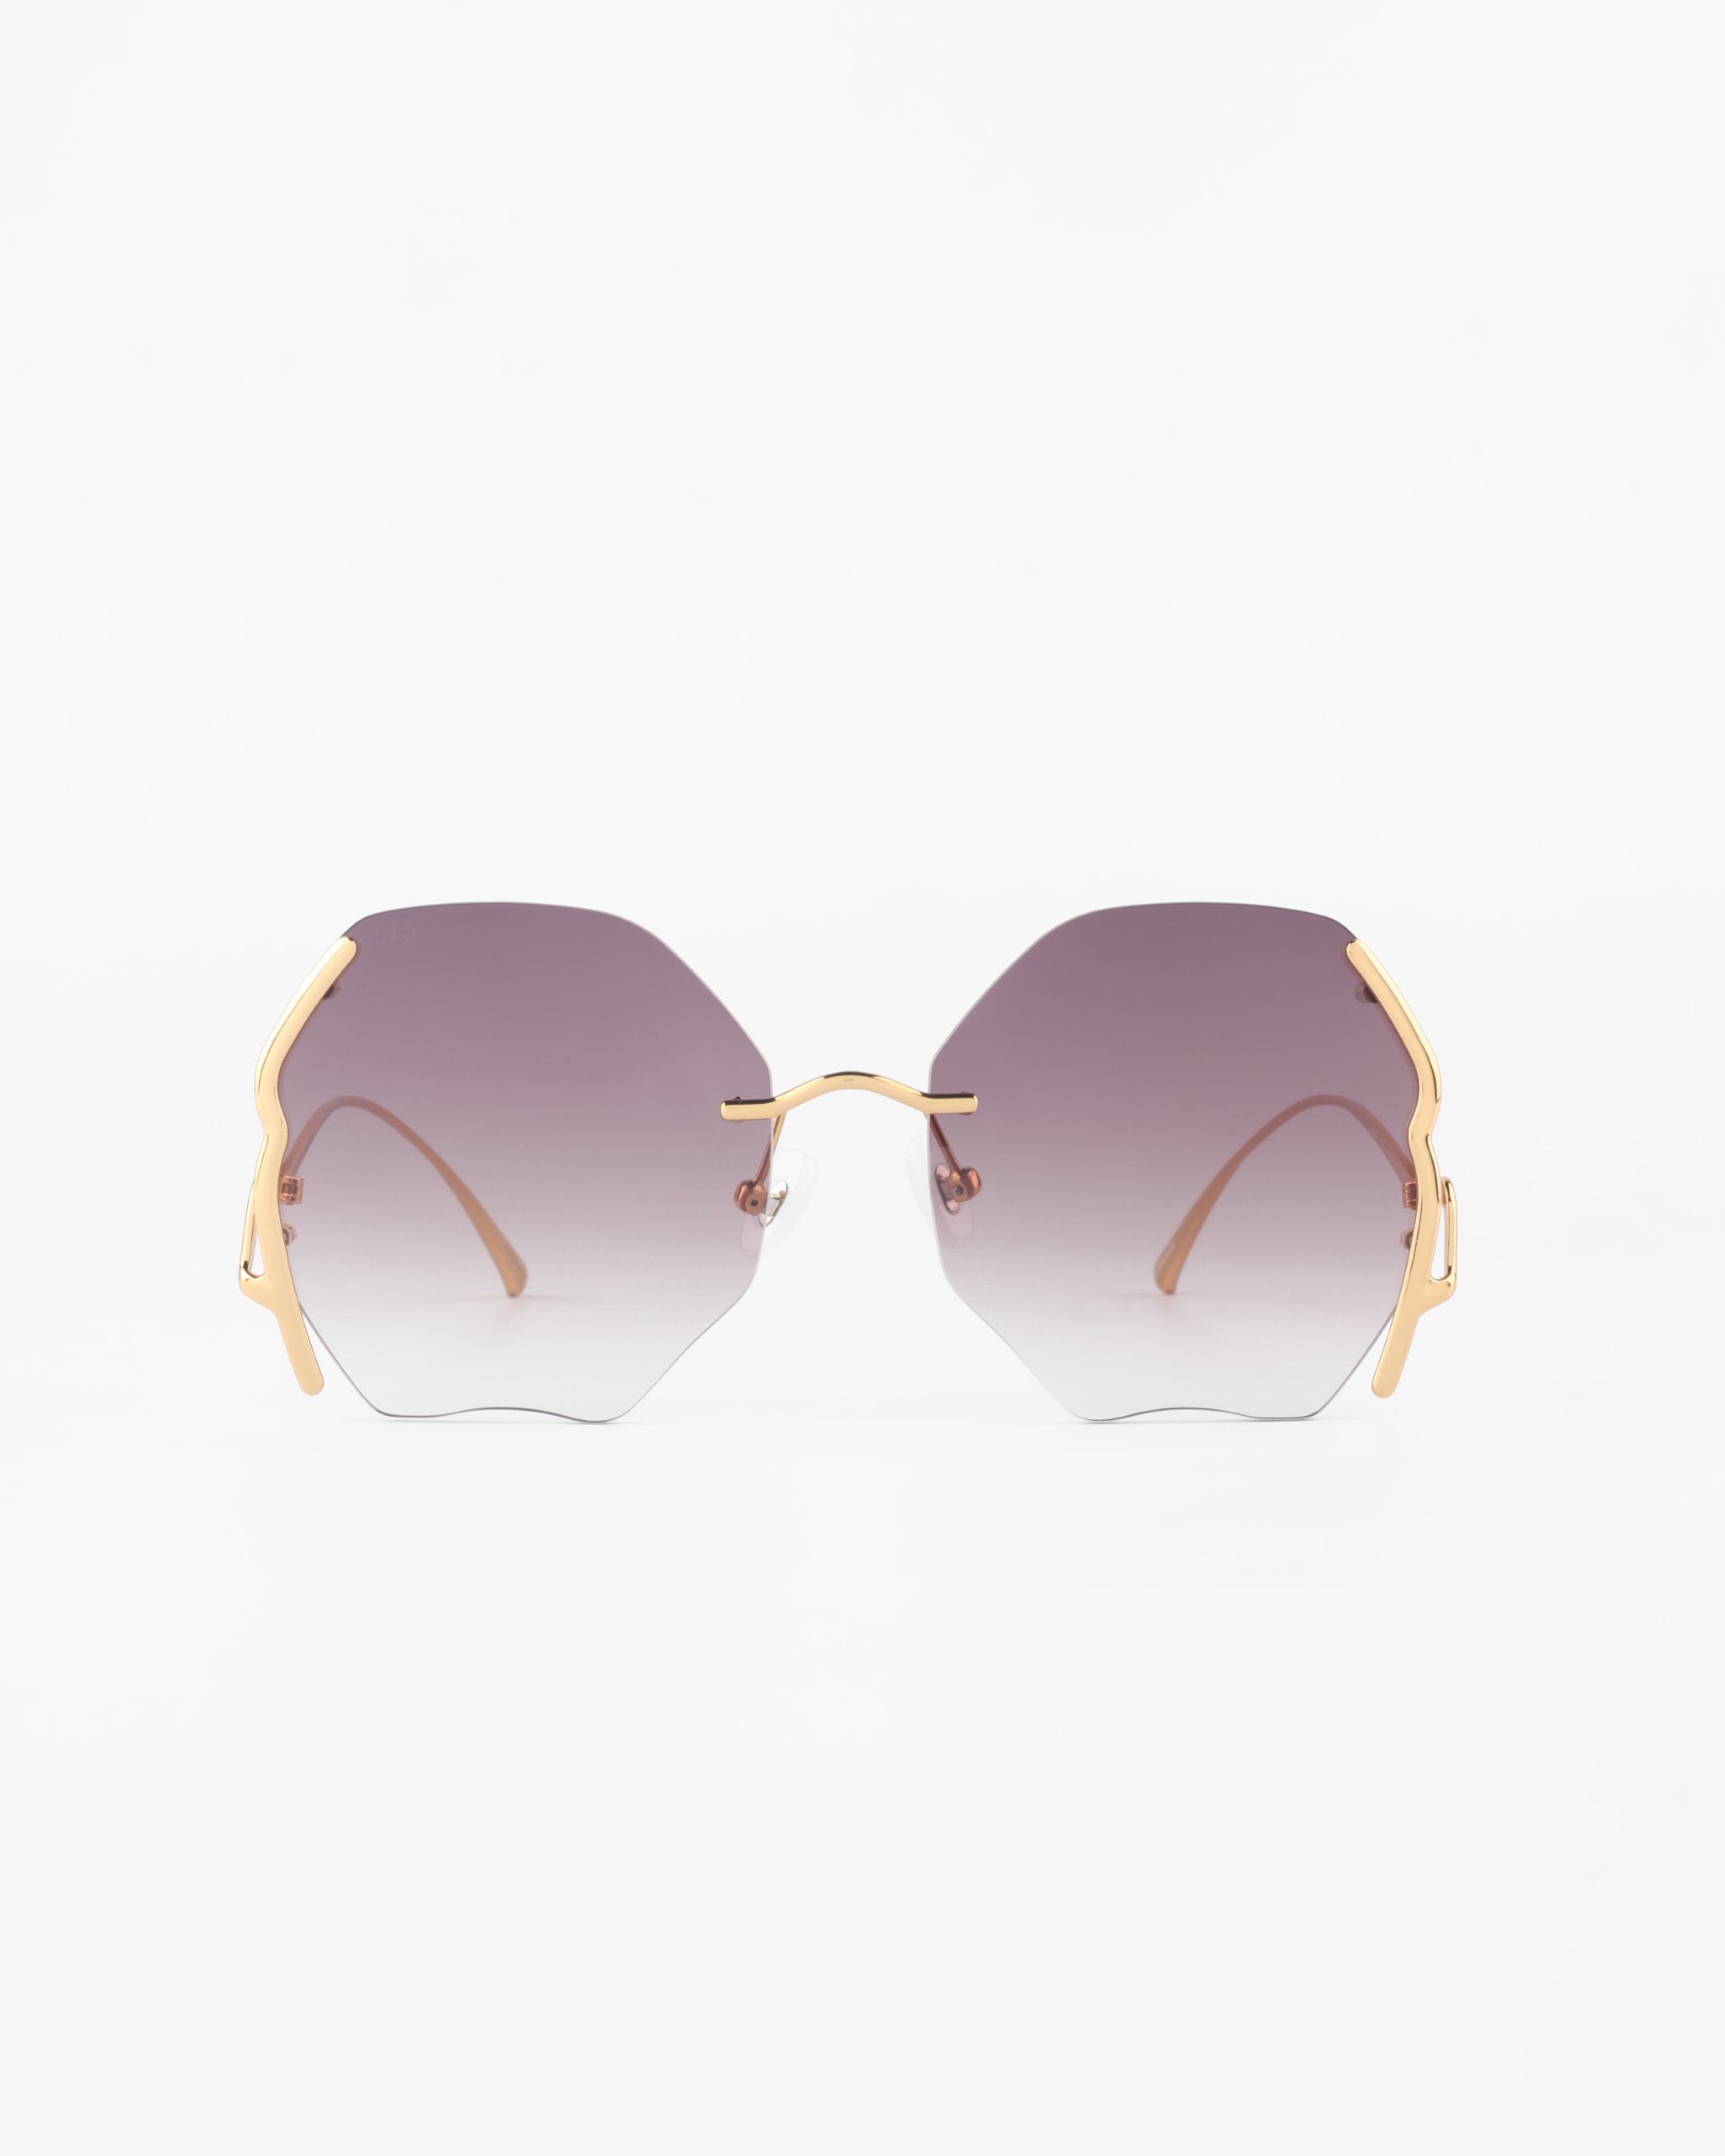 A front view of For Art's Sake® Century sunglasses with hexagonal lenses that have a gradient from dark purple to clear. The gold-plated stainless steel frames feature minimalist design with gold accents on the sides. These stylish shades offer 100% UVA & UVB protection against harmful rays. The background is plain white.